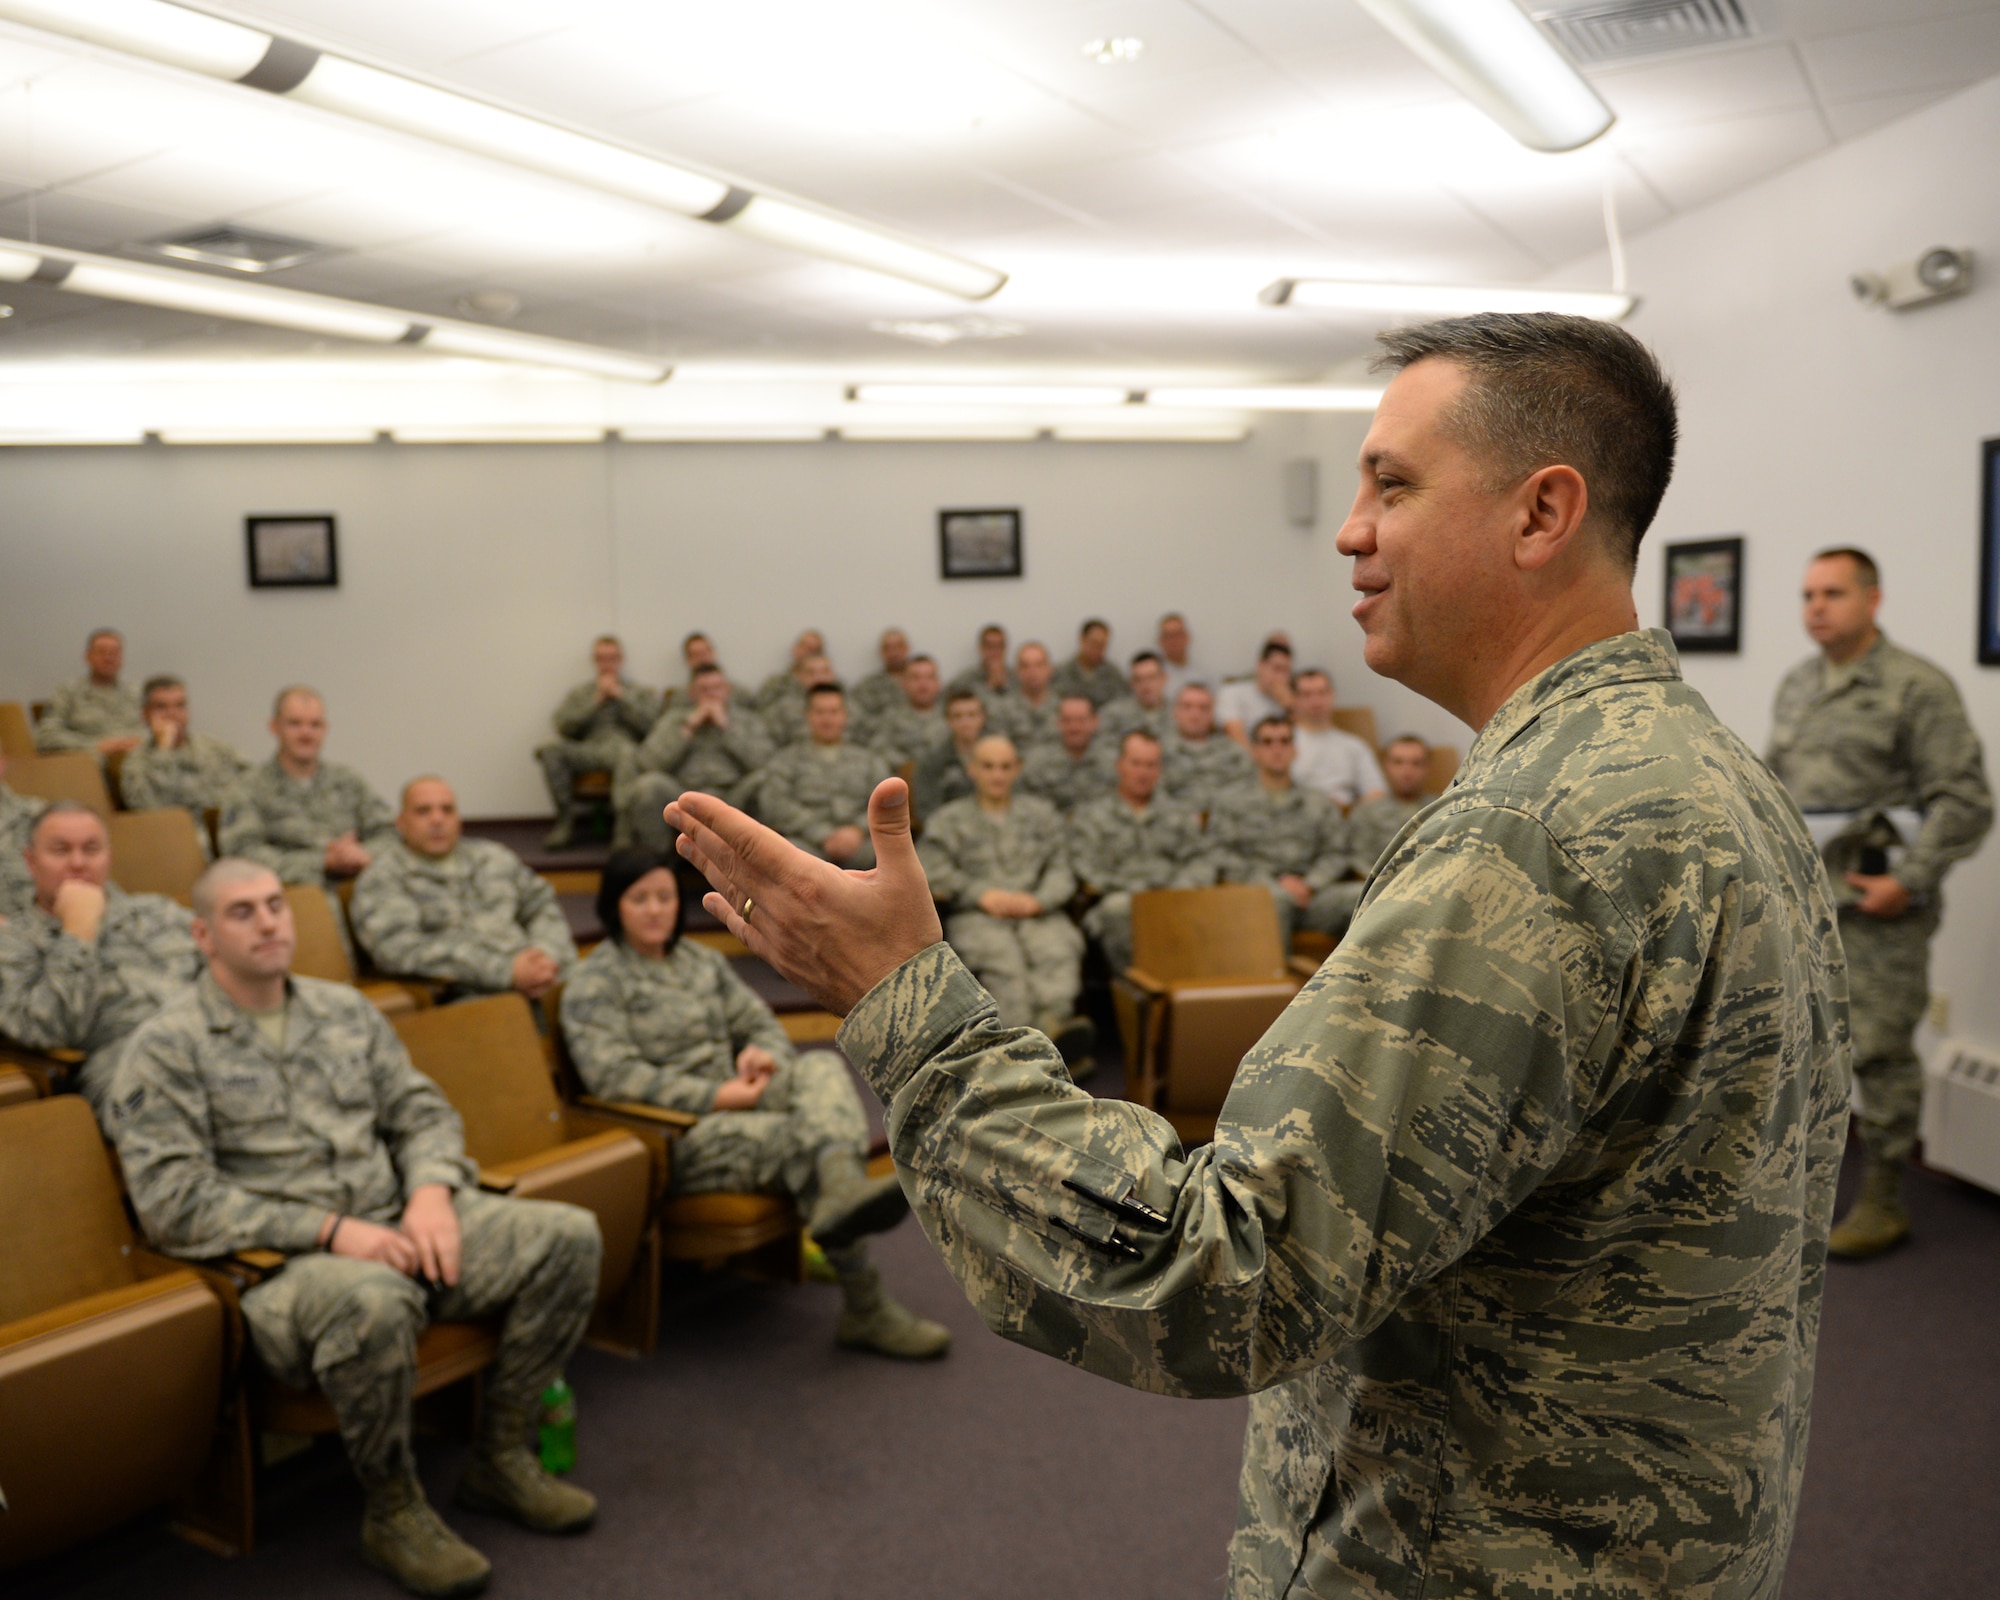 U.S. Air Force Brig. Gen. Michael. R. Taheri, commander Air National Guard Readiness Center at Joint Base Andrews, Maryland, speaks to Airmen in the 260th Air Traffic Control Squadron during a base visit to Pease Air National Guard Base, New Hampshire, Nov. 7, 2015. (U.S. Air National Guard photo by Staff Sgt. Curtis J. Lenz)